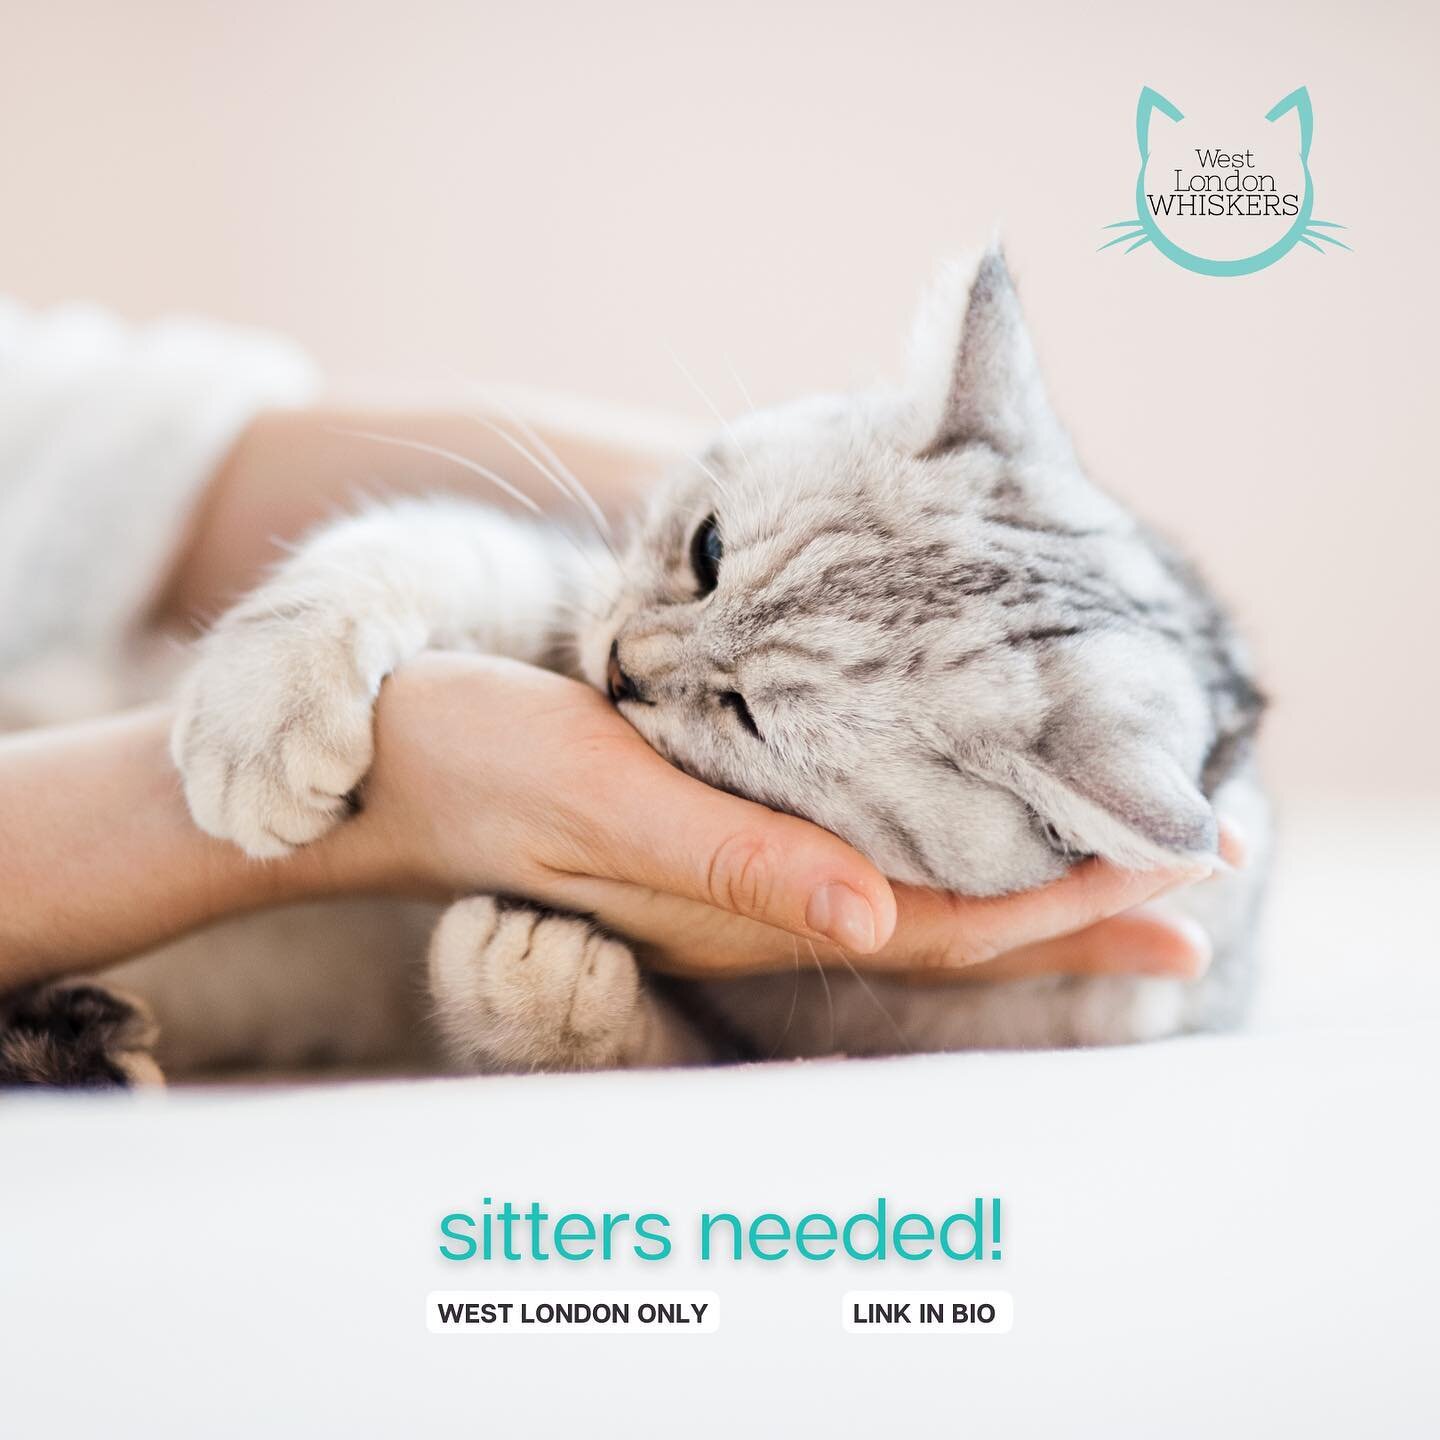 We are looking for sitters to join our small catsitting agency West London Whiskers.  MUST BE EXPERIENCED WITH CATS + MUST BE AVAILABLE OVER FESTIVE SEASON 🎄🎄🎄We are currently ONLY looking for sitters in West London and in the areas specifically m